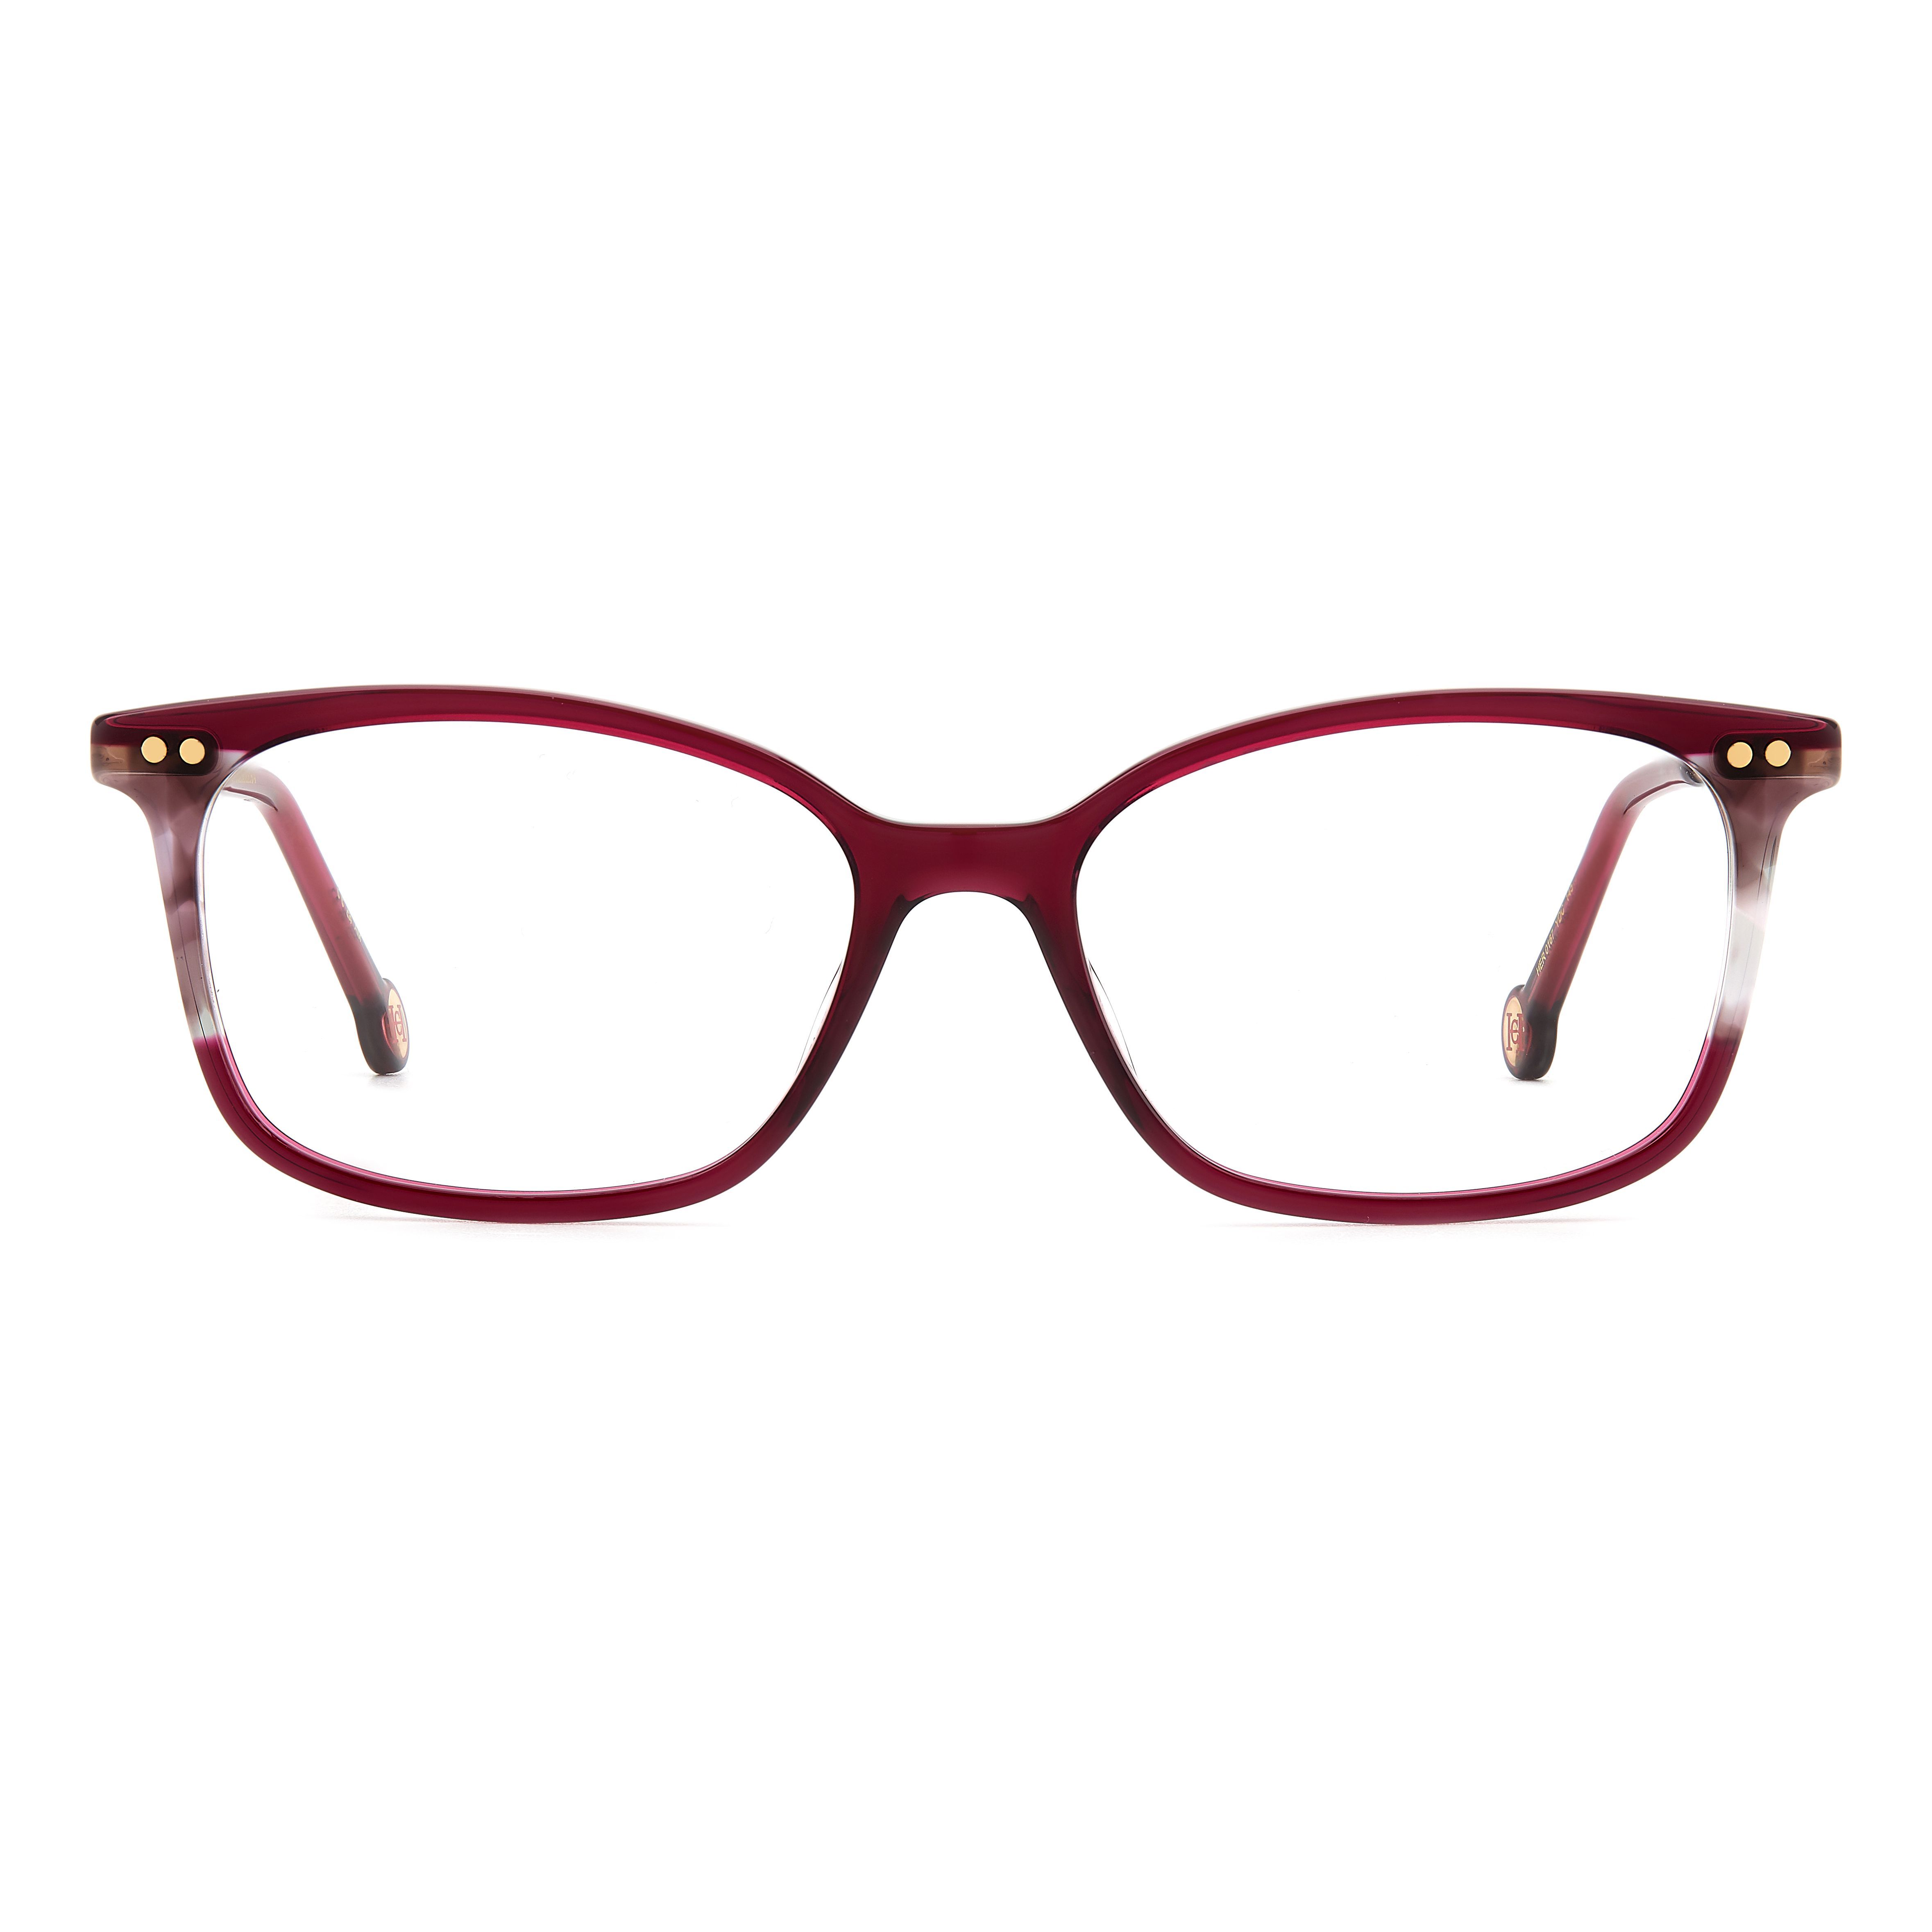 HER 0167 Square Eyeglasses YDC - size 53